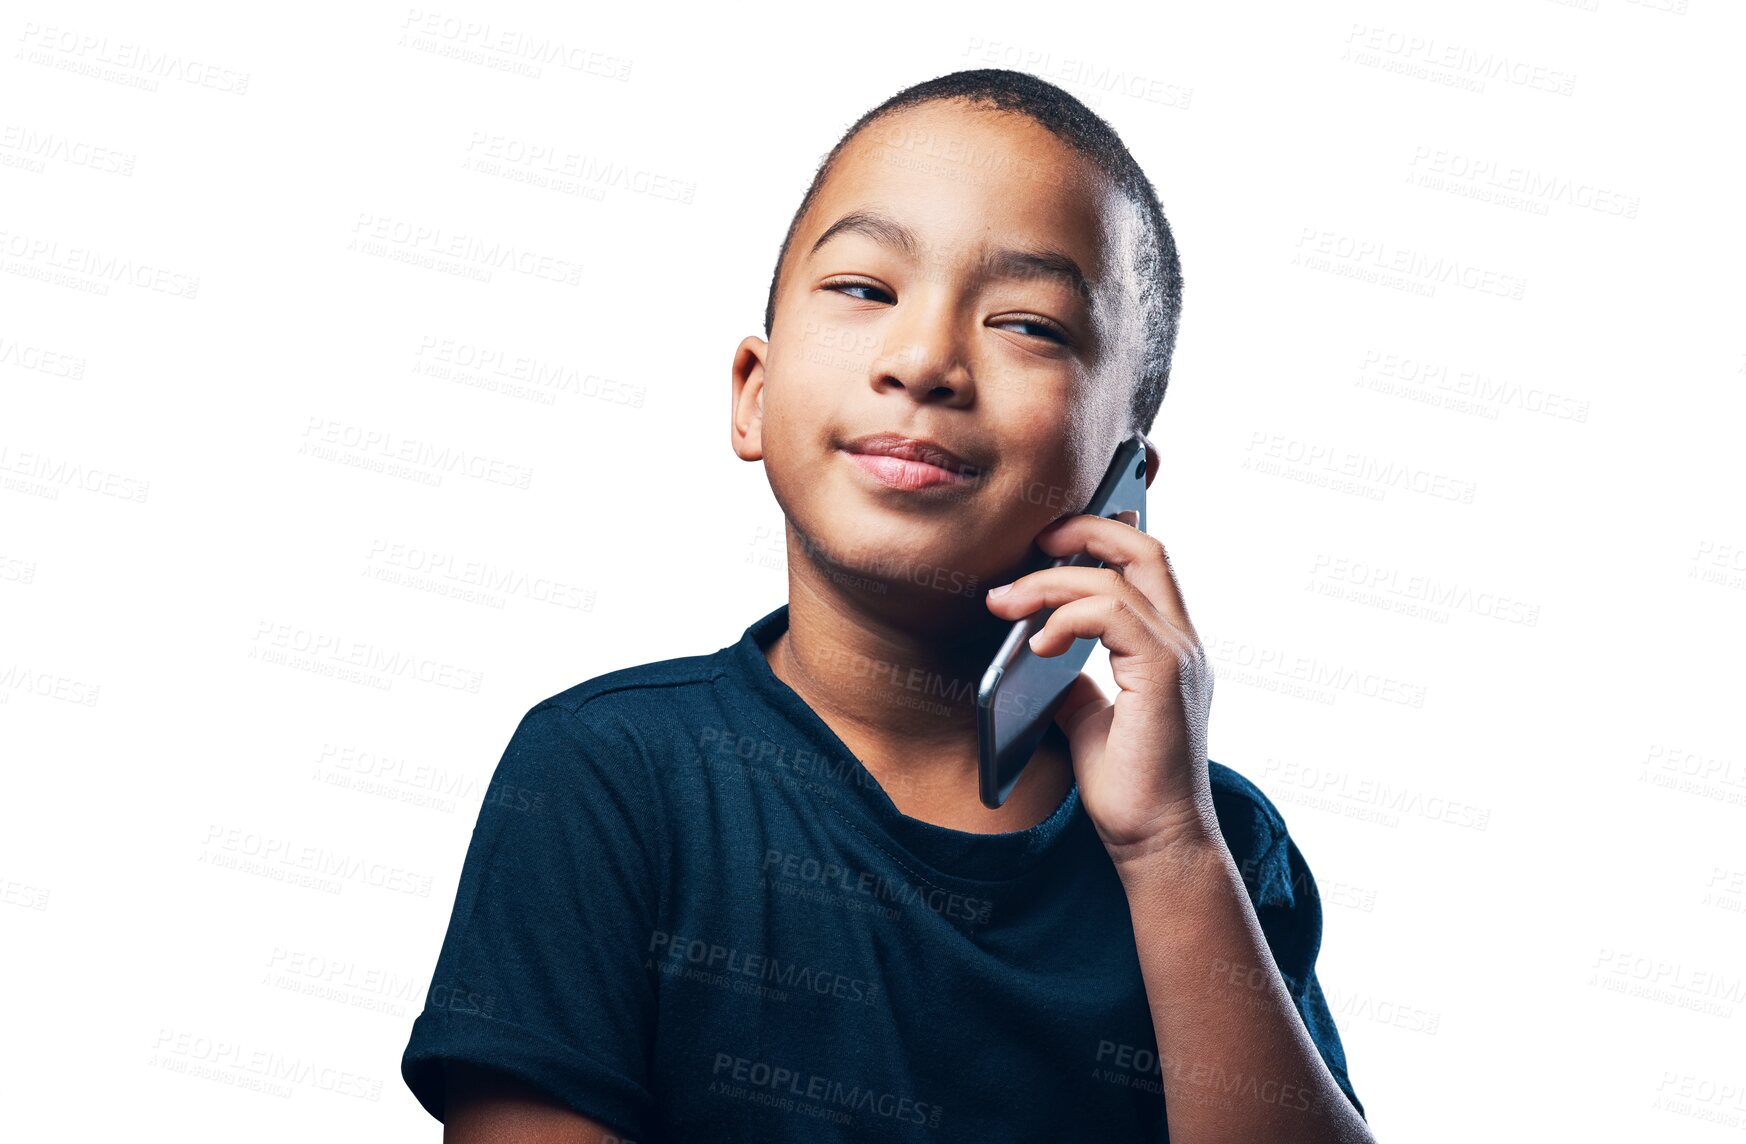 Buy stock photo Isolated boy child, phone call and thinking with listening, chat or contact by transparent png background. Young male kid, cellphone or tech with idea, question or secret for communication on network